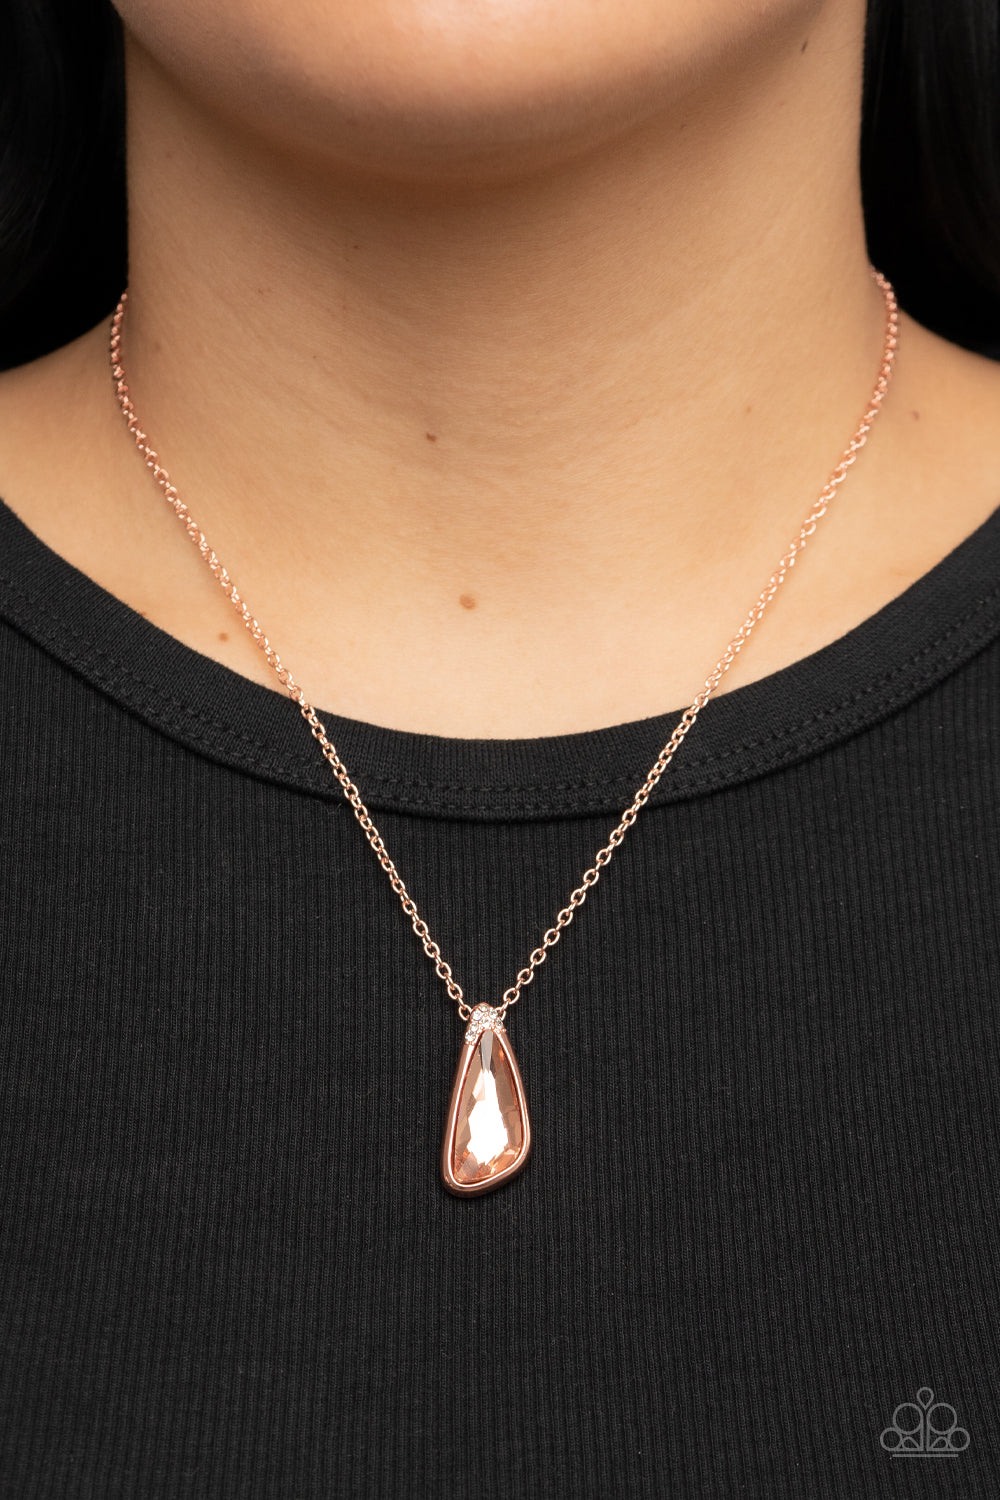 Envious Extravagance - Copper Gem Fashion Necklace - Paparazzi Accessories - An asymmetrical coppery gem is pressed into a shiny copper frame dusted in glassy white rhinestones, resulting in a refined pendant at the bottom of a dainty shiny copper chain. Features an adjustable clasp closure.